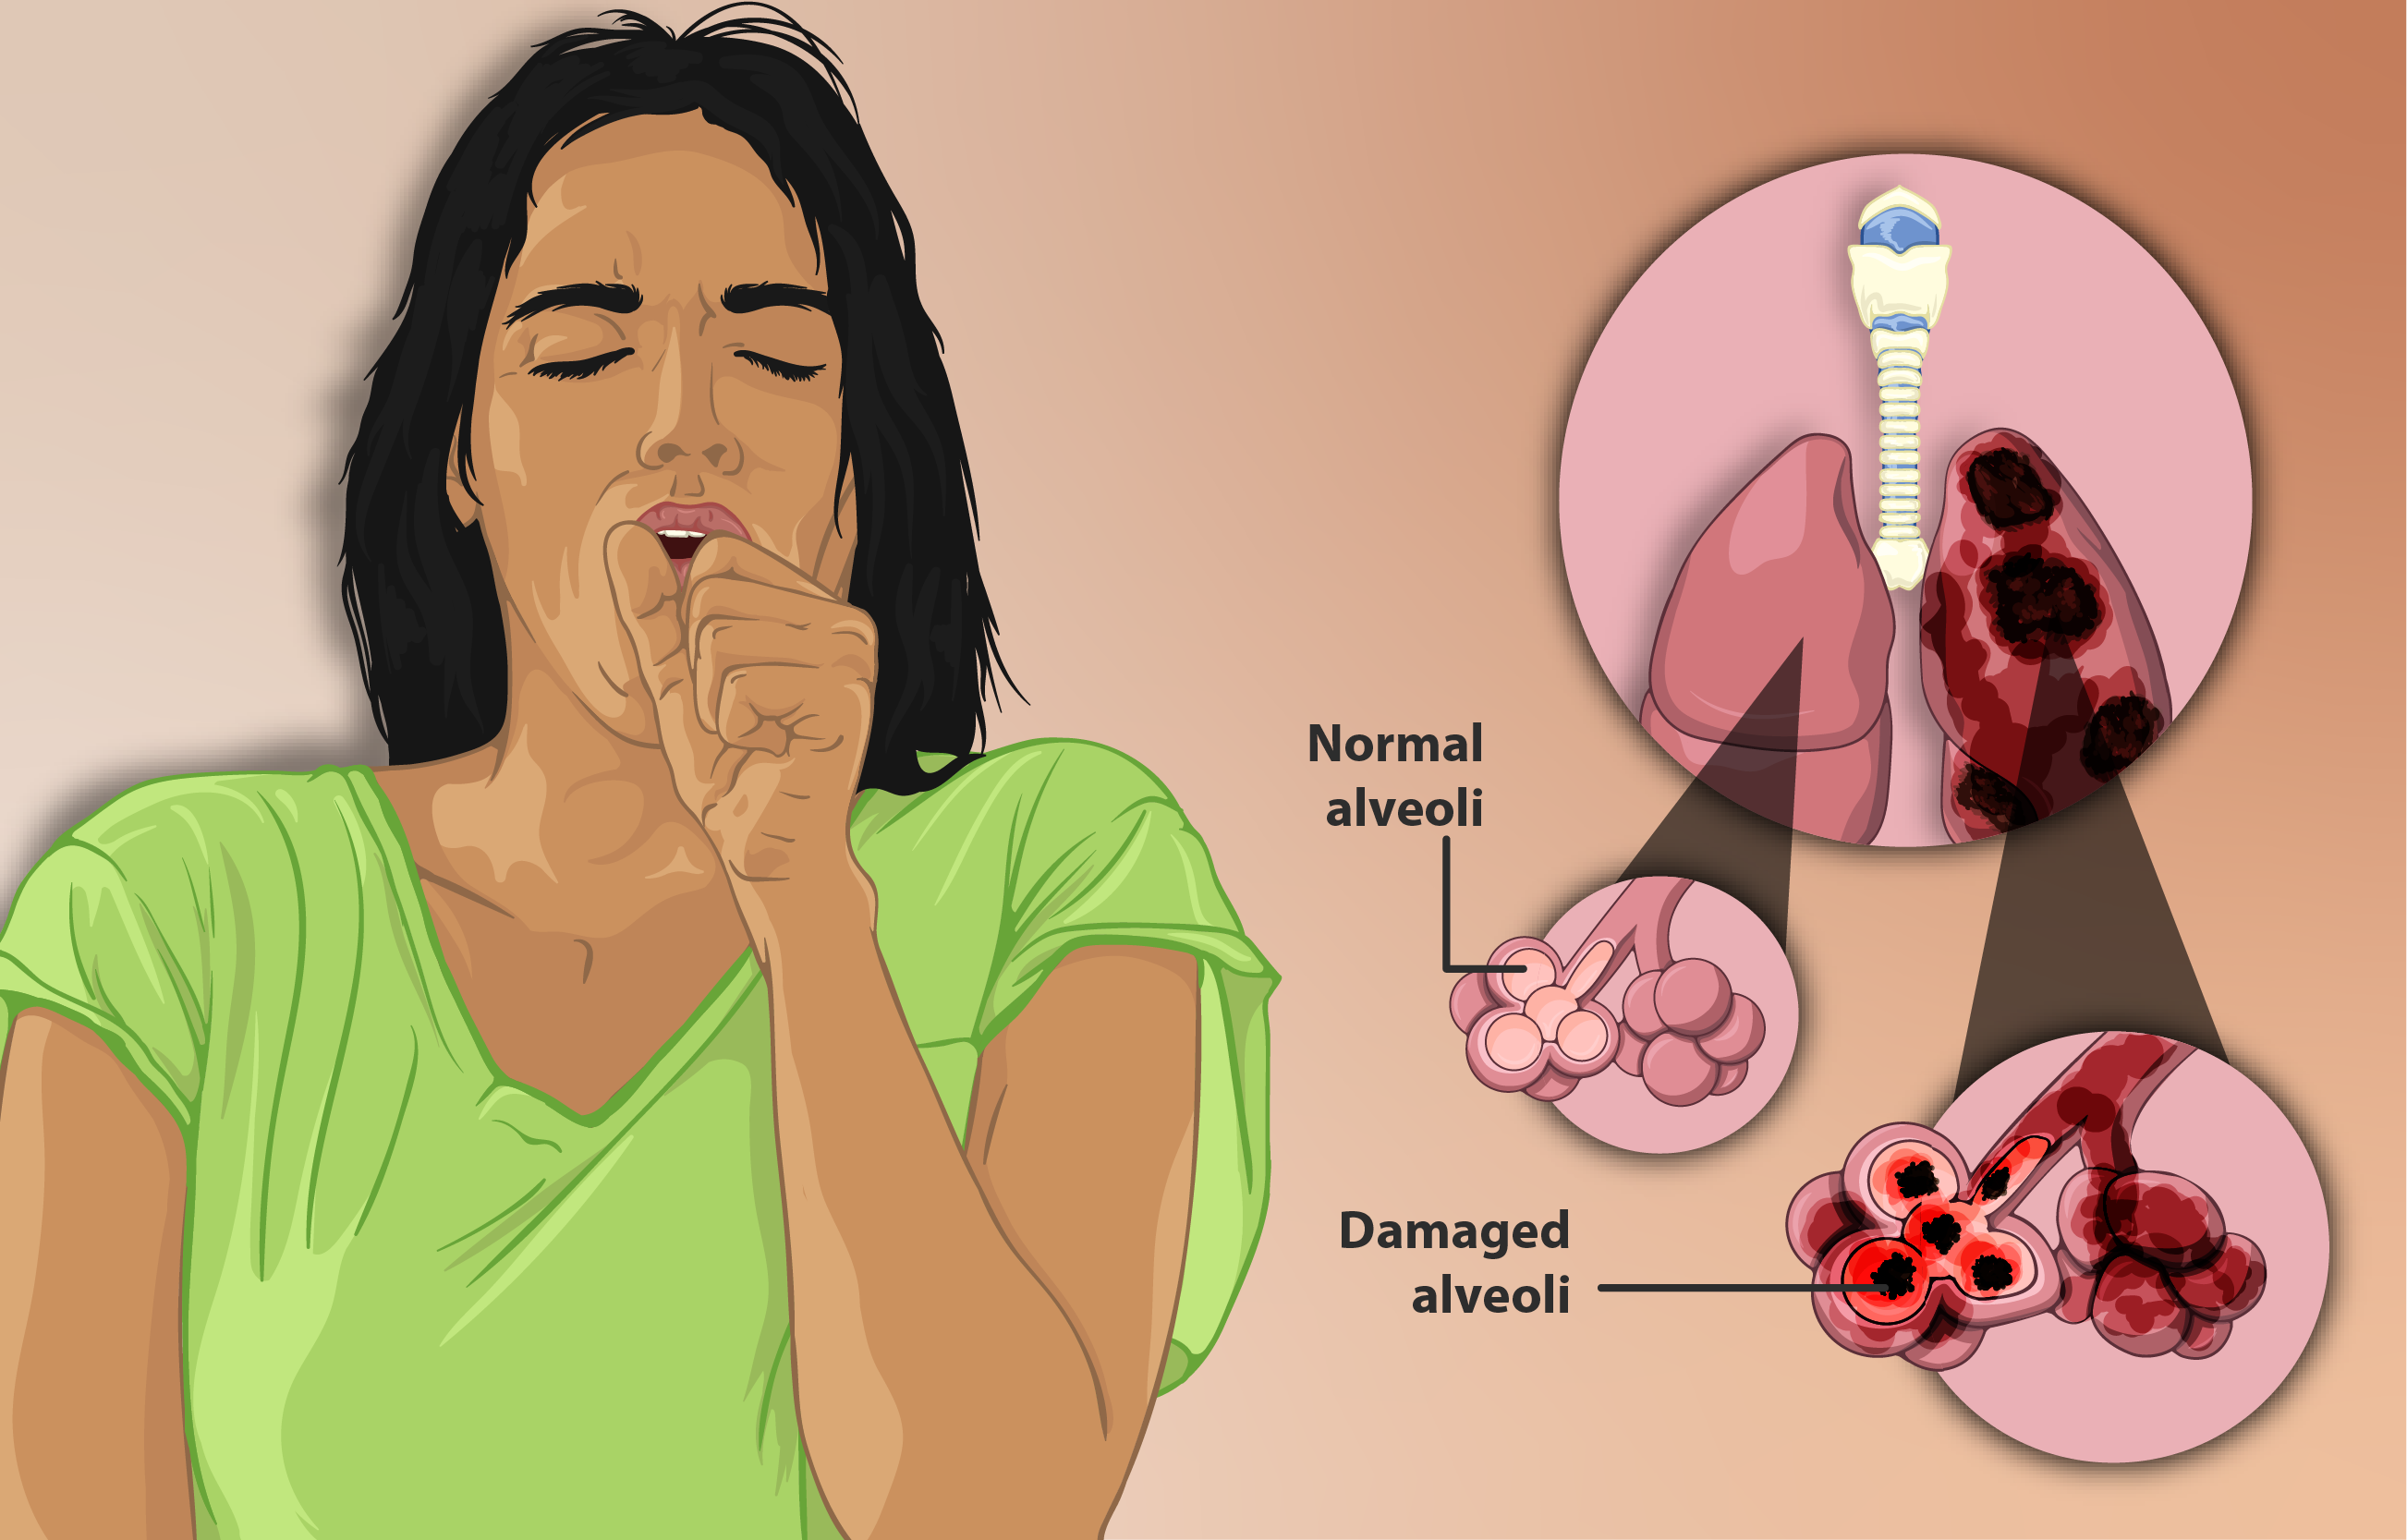 Depiction of a woman suffering from Emphysema, a type of Chronic Obstructive Pulmonary Disease.png